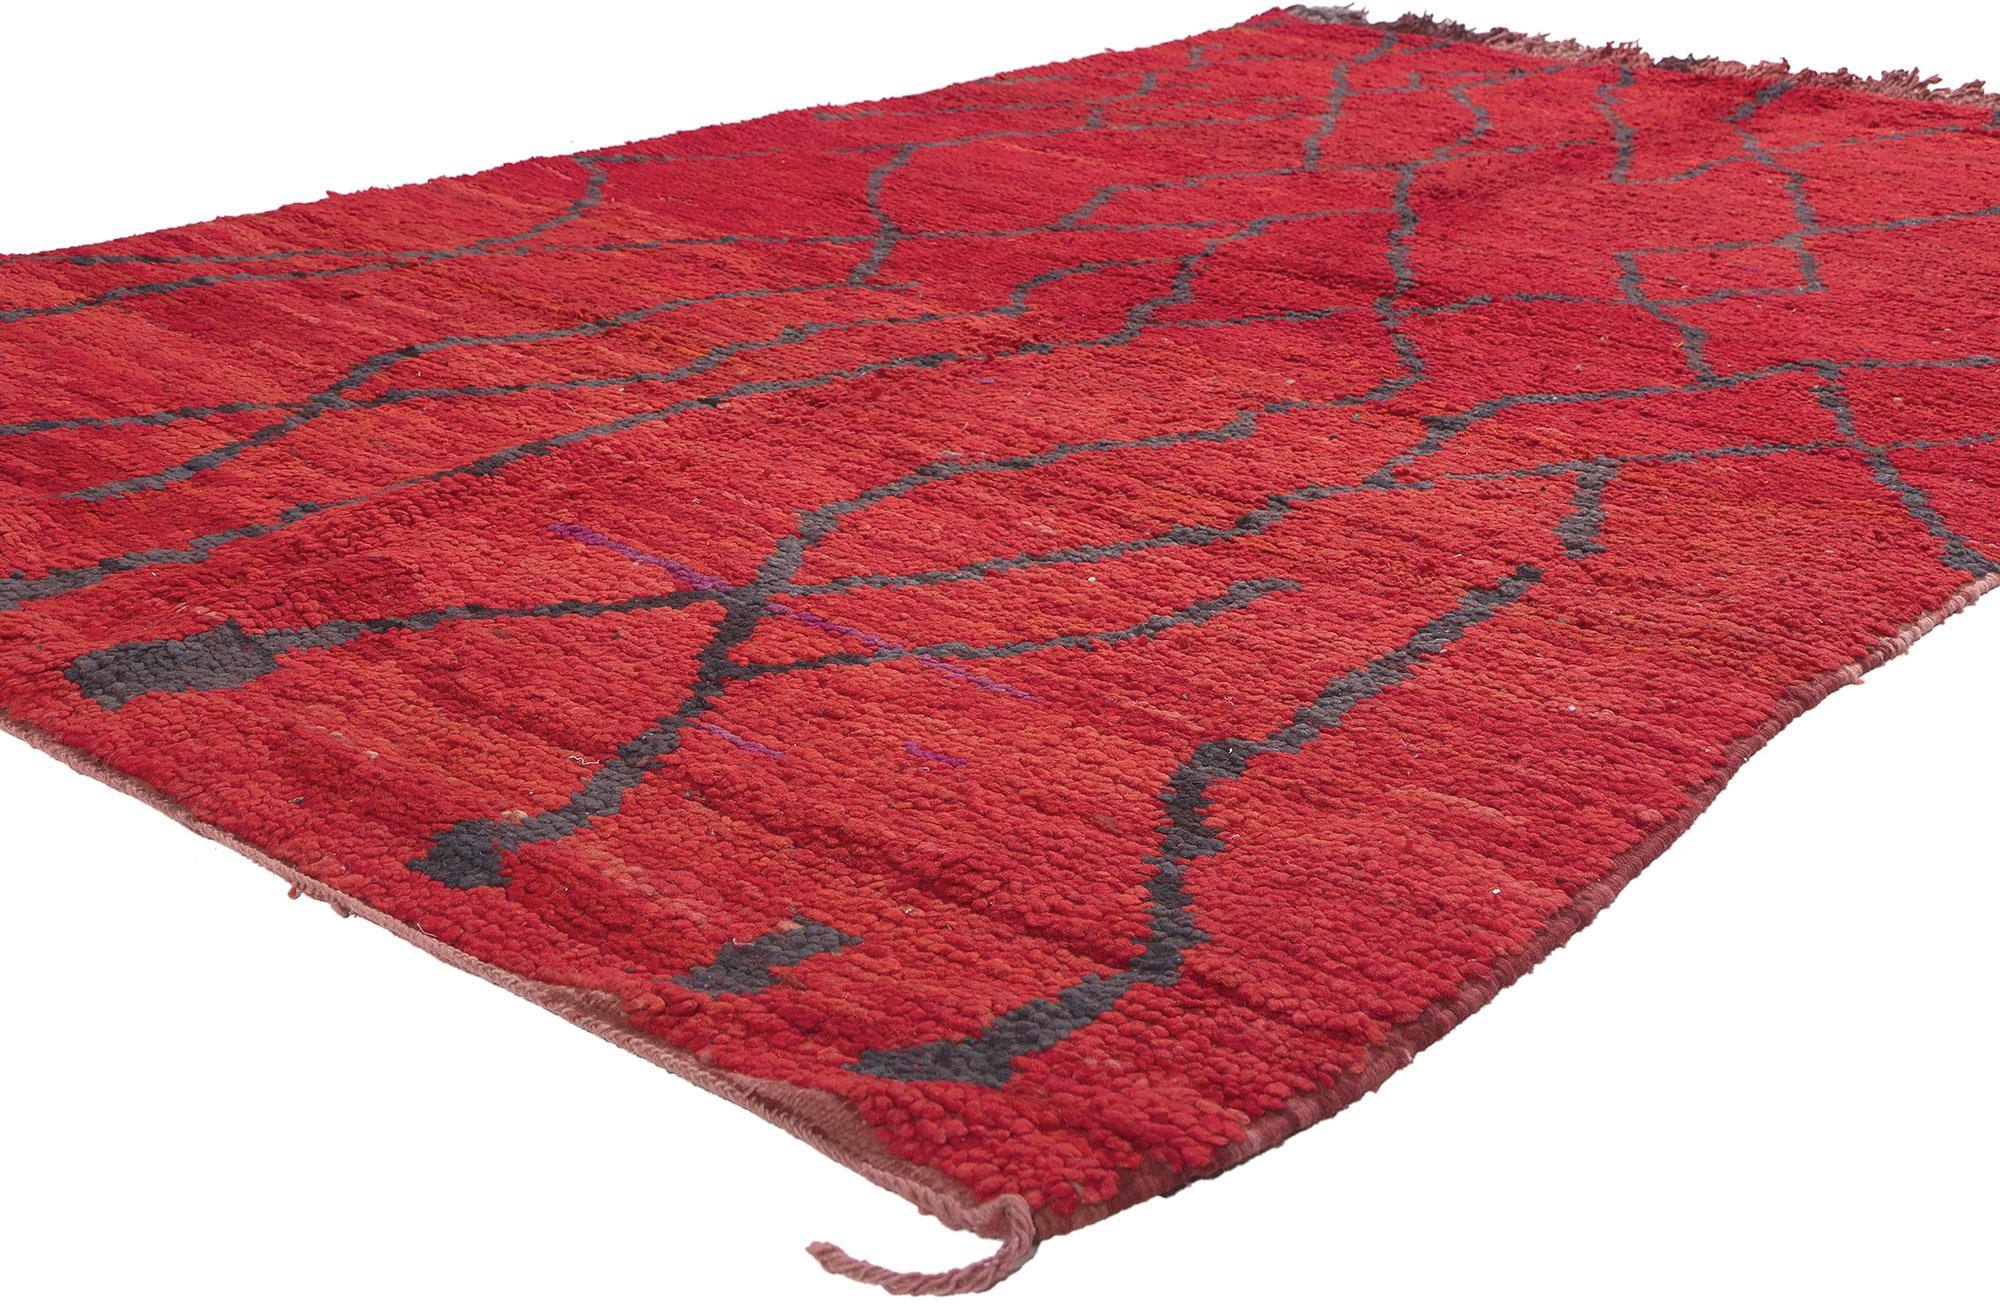 20303 Vintage Red Talsint Moroccan Rug, 05'00 X 07'10. Witness the mesmerizing artistry of this hand-knotted wool vintage red Talsint Moroccan rug, originating from the Figuig region in northeast Morocco, also known as Aït Bou Ichaouen. Unveiling a